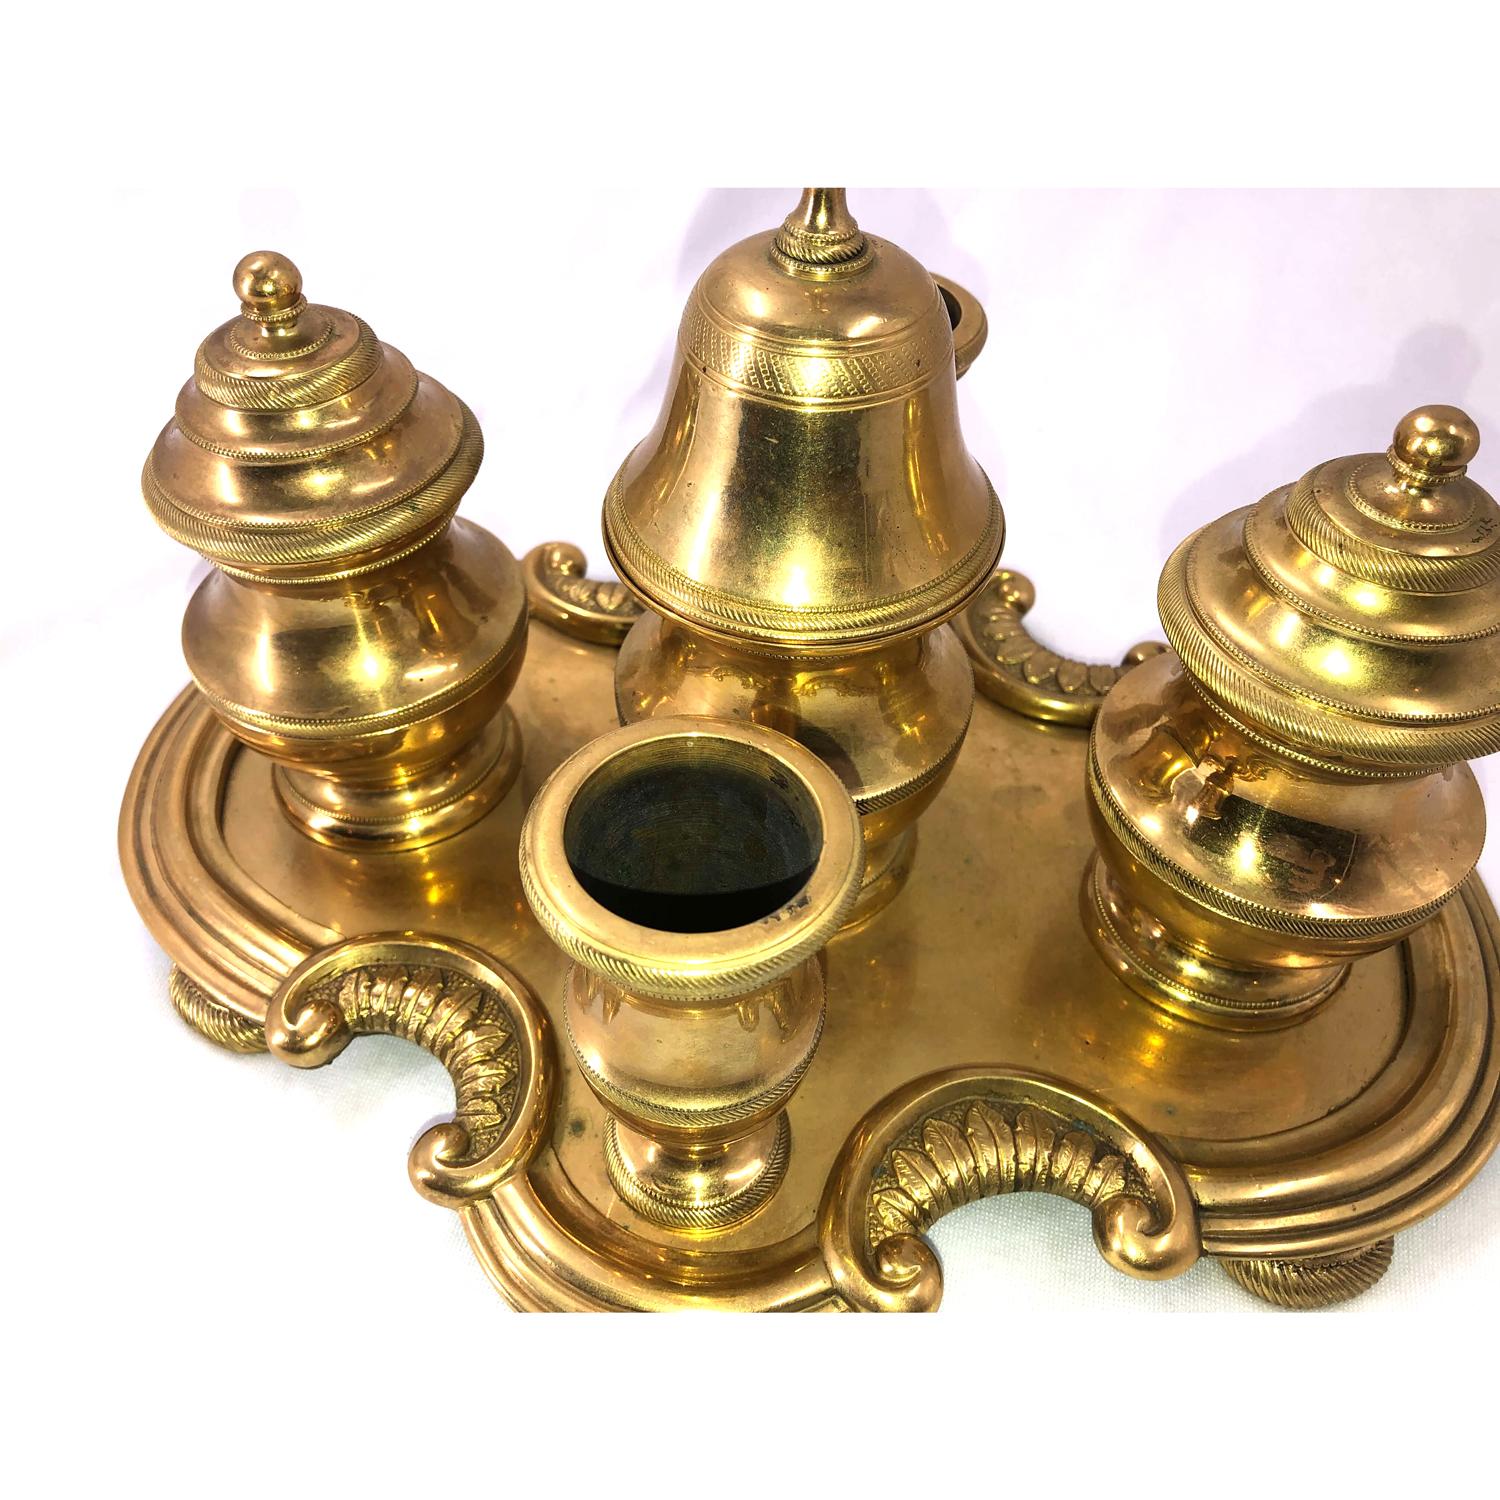 A fine English gilt bronze serpentine desk set with bell, sander, inkpot and candleholders.